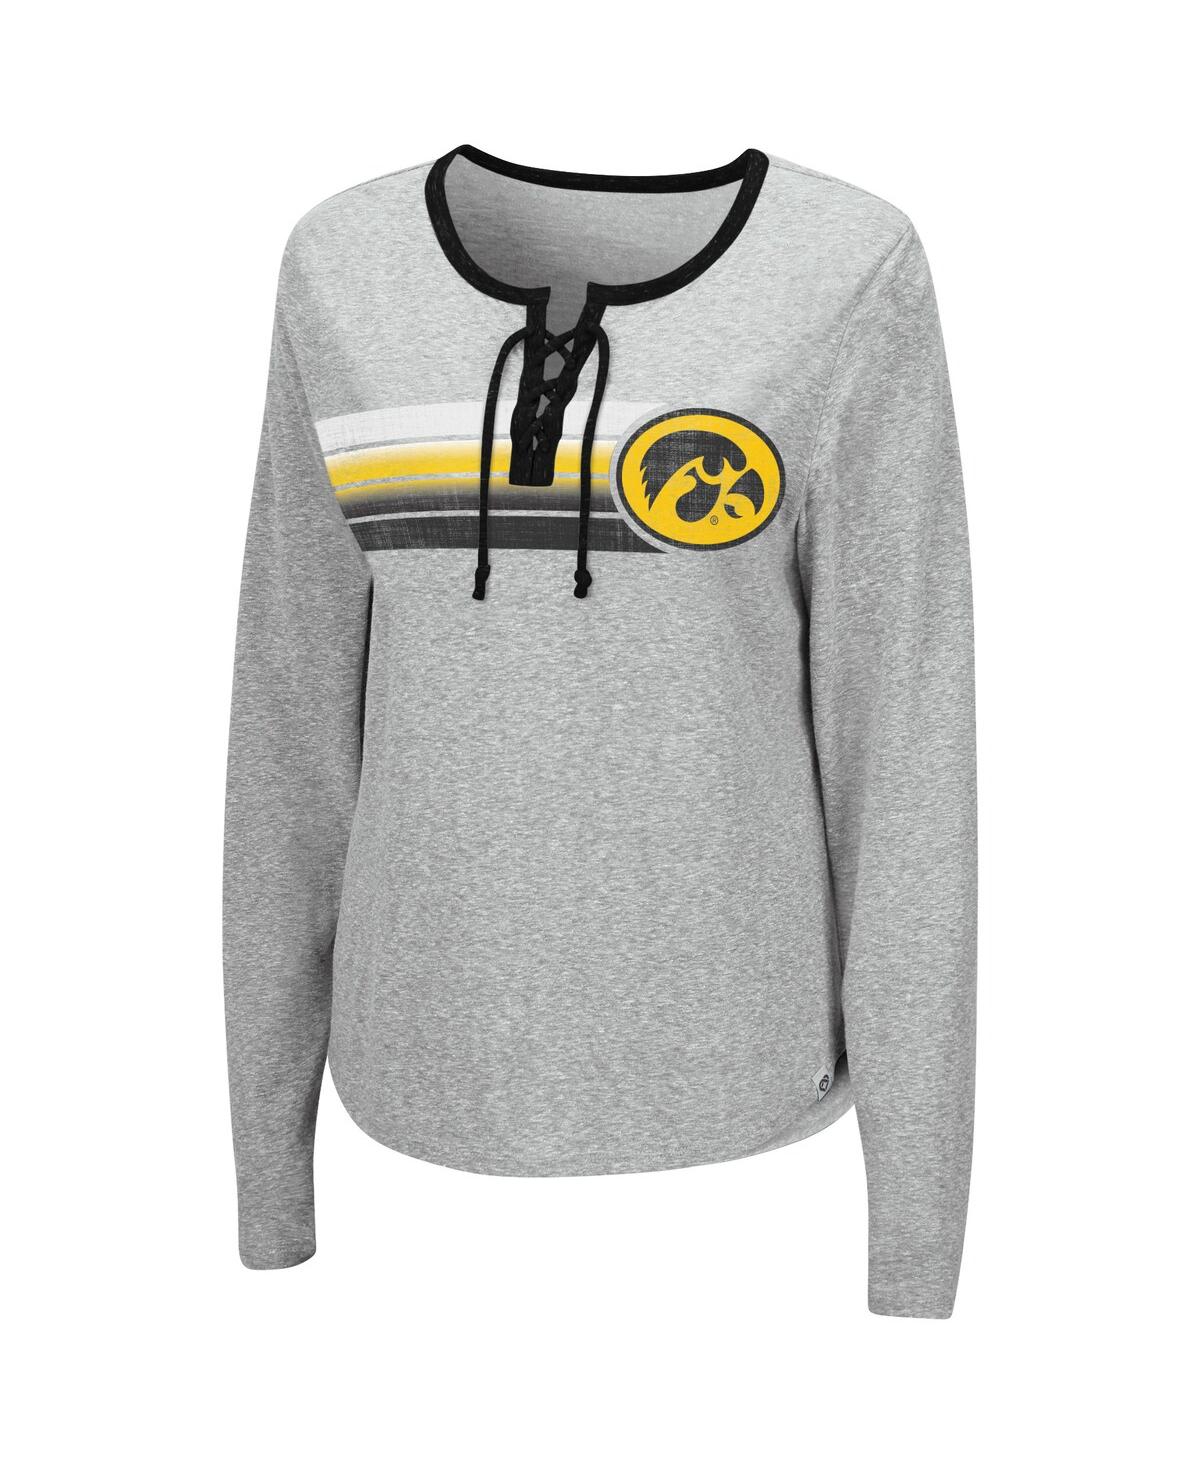 Shop Colosseum Women's  Heathered Gray Iowa Hawkeyes Sundial Tri-blend Long Sleeve Lace-up T-shirt